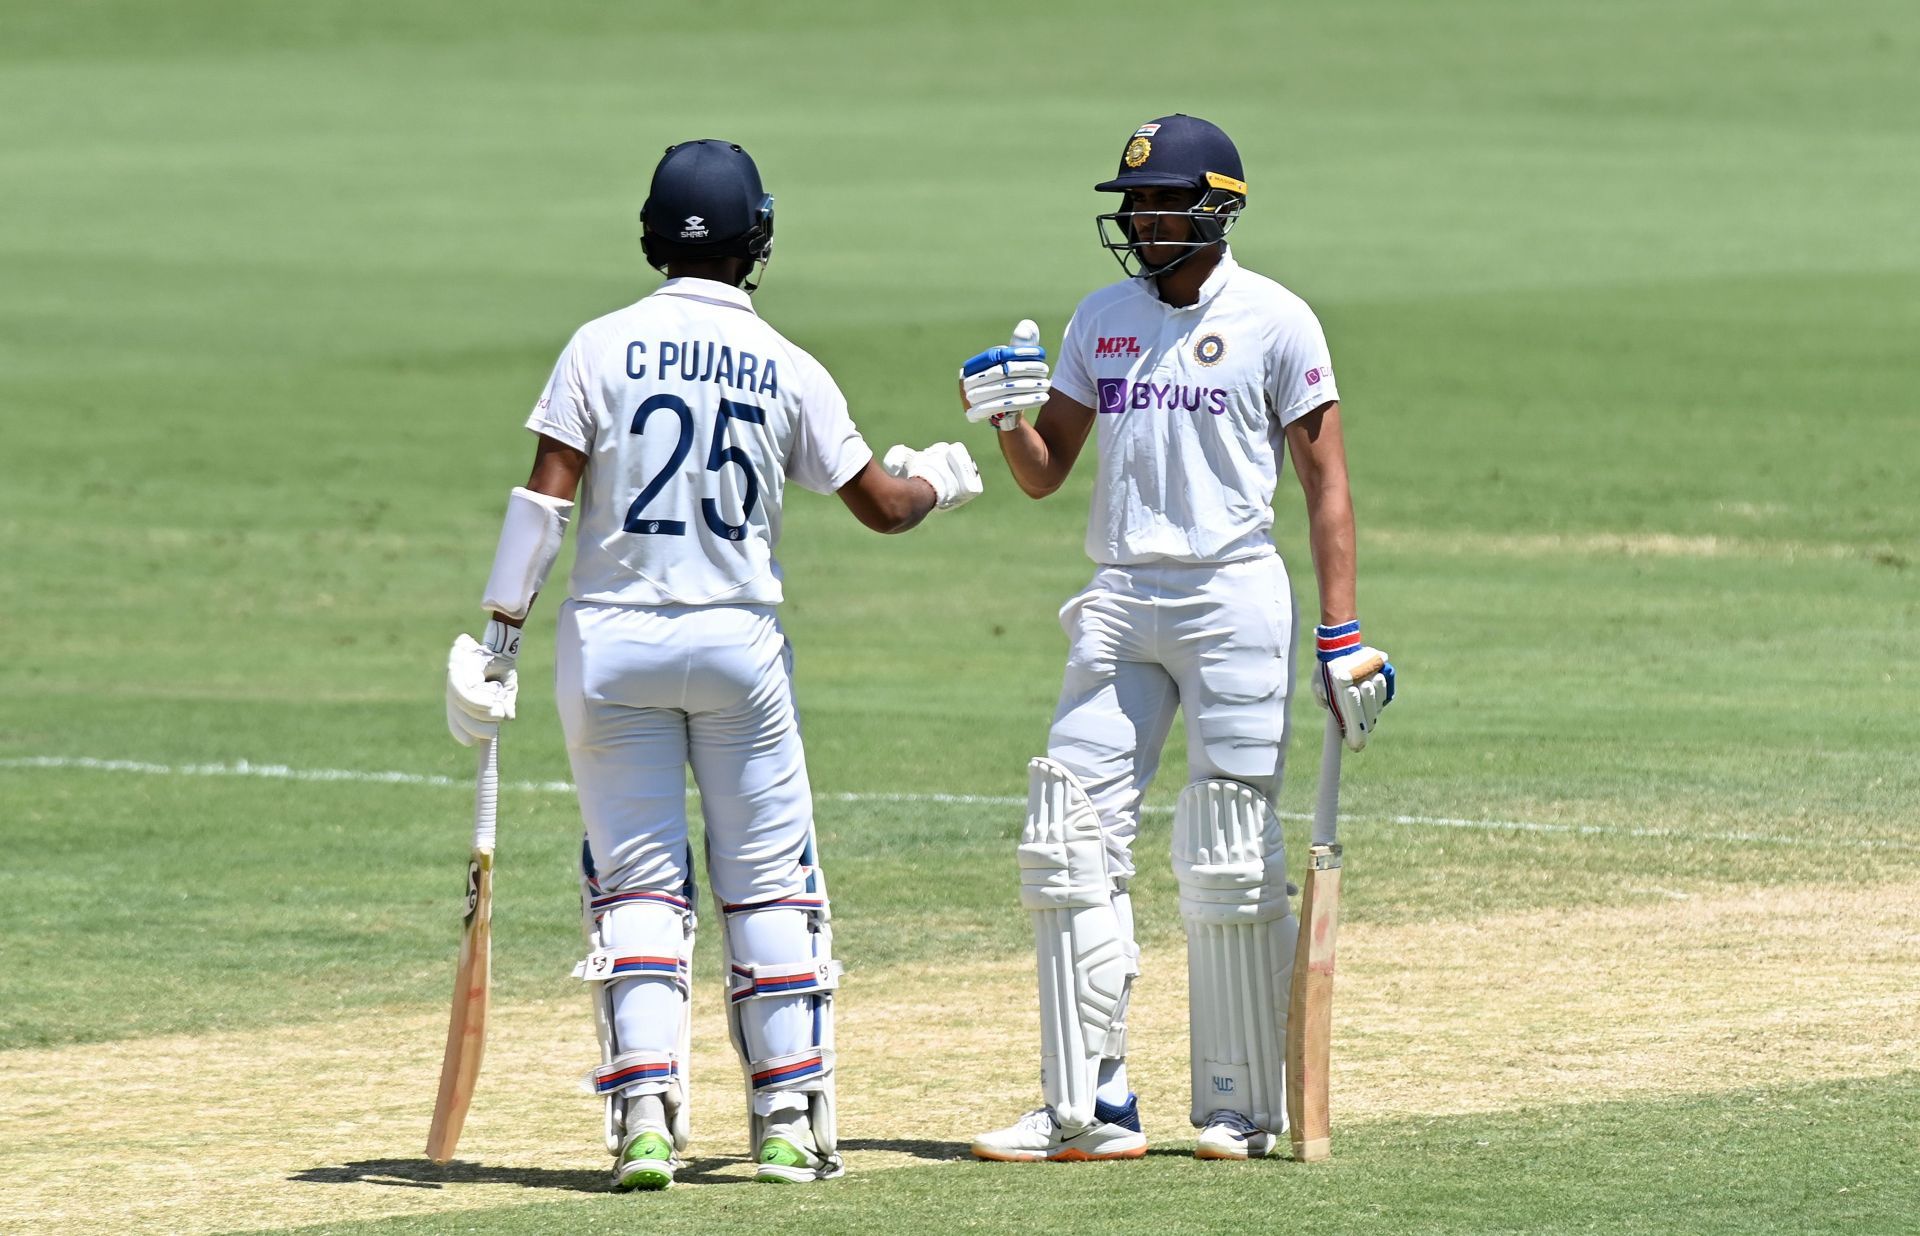 Cheteshwar Pujara (L) and Shubman Gill (R) during their 114-run stand during the famous Gabba Test